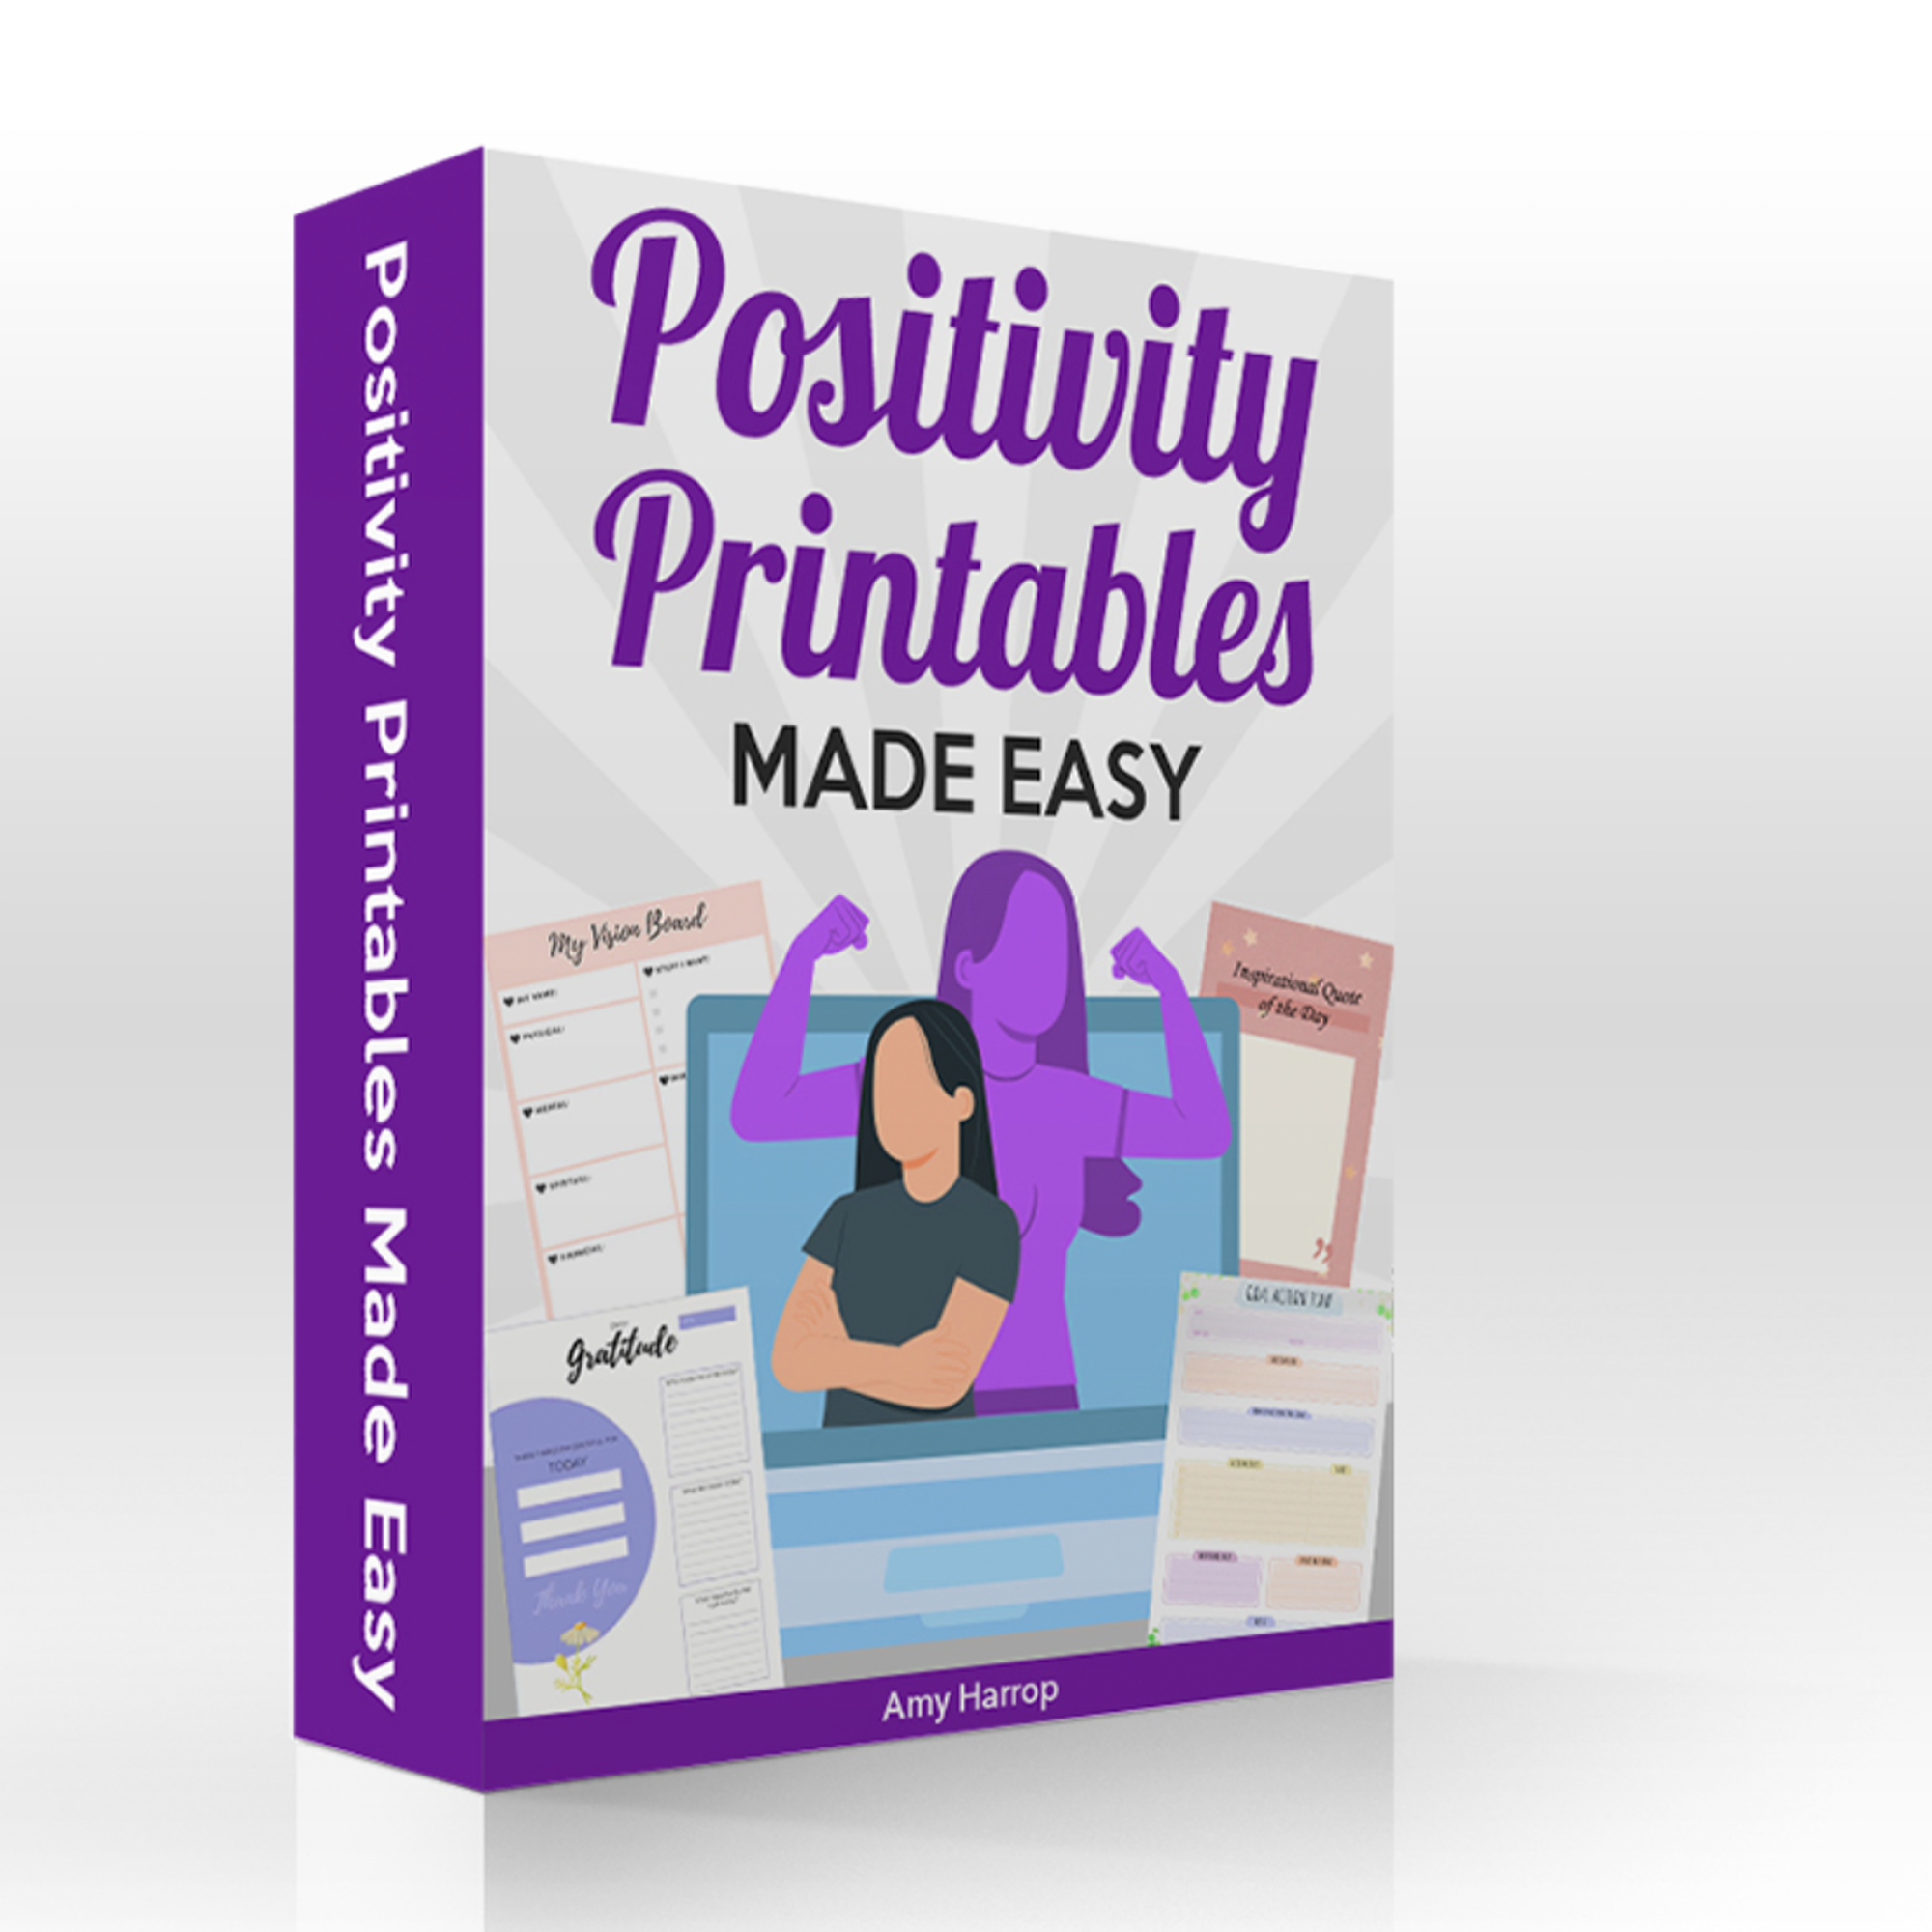 Positively Printable